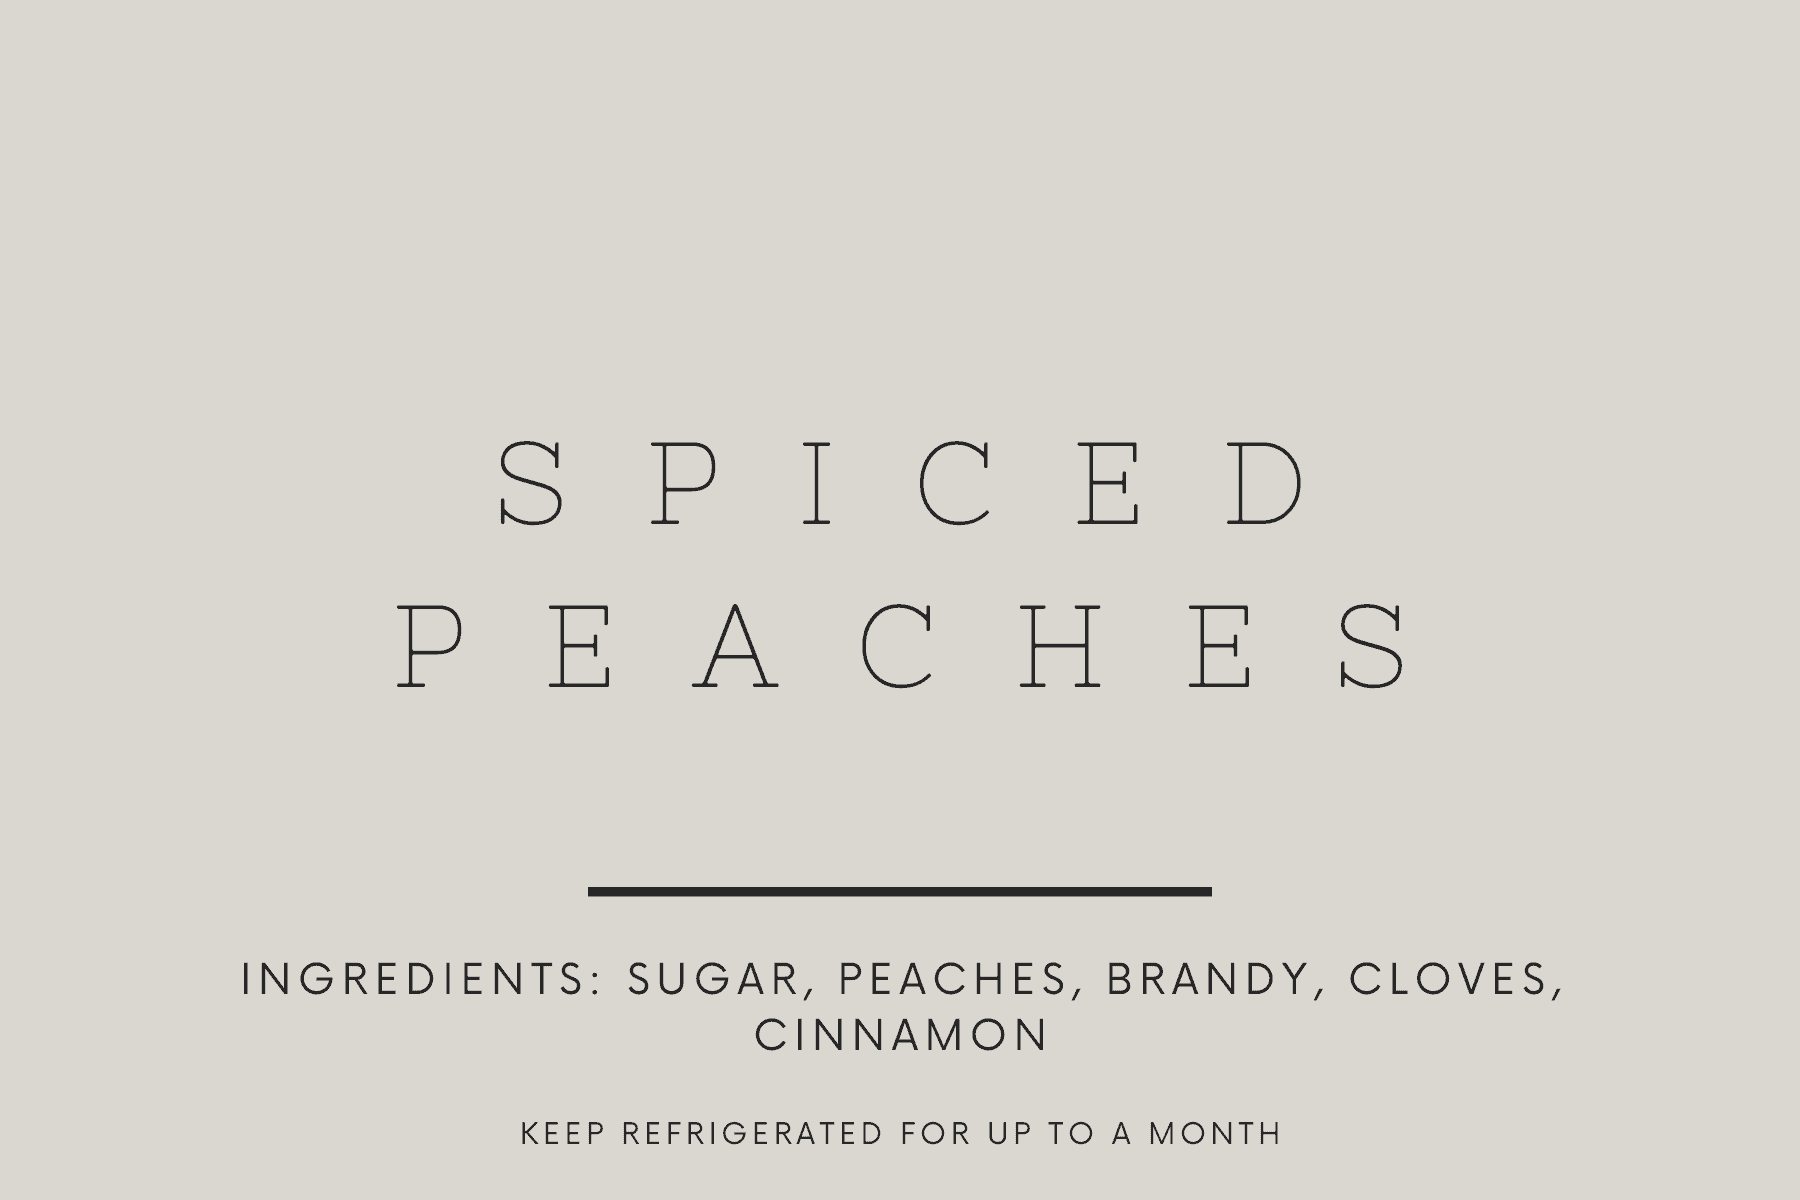 Label for spiced peaches